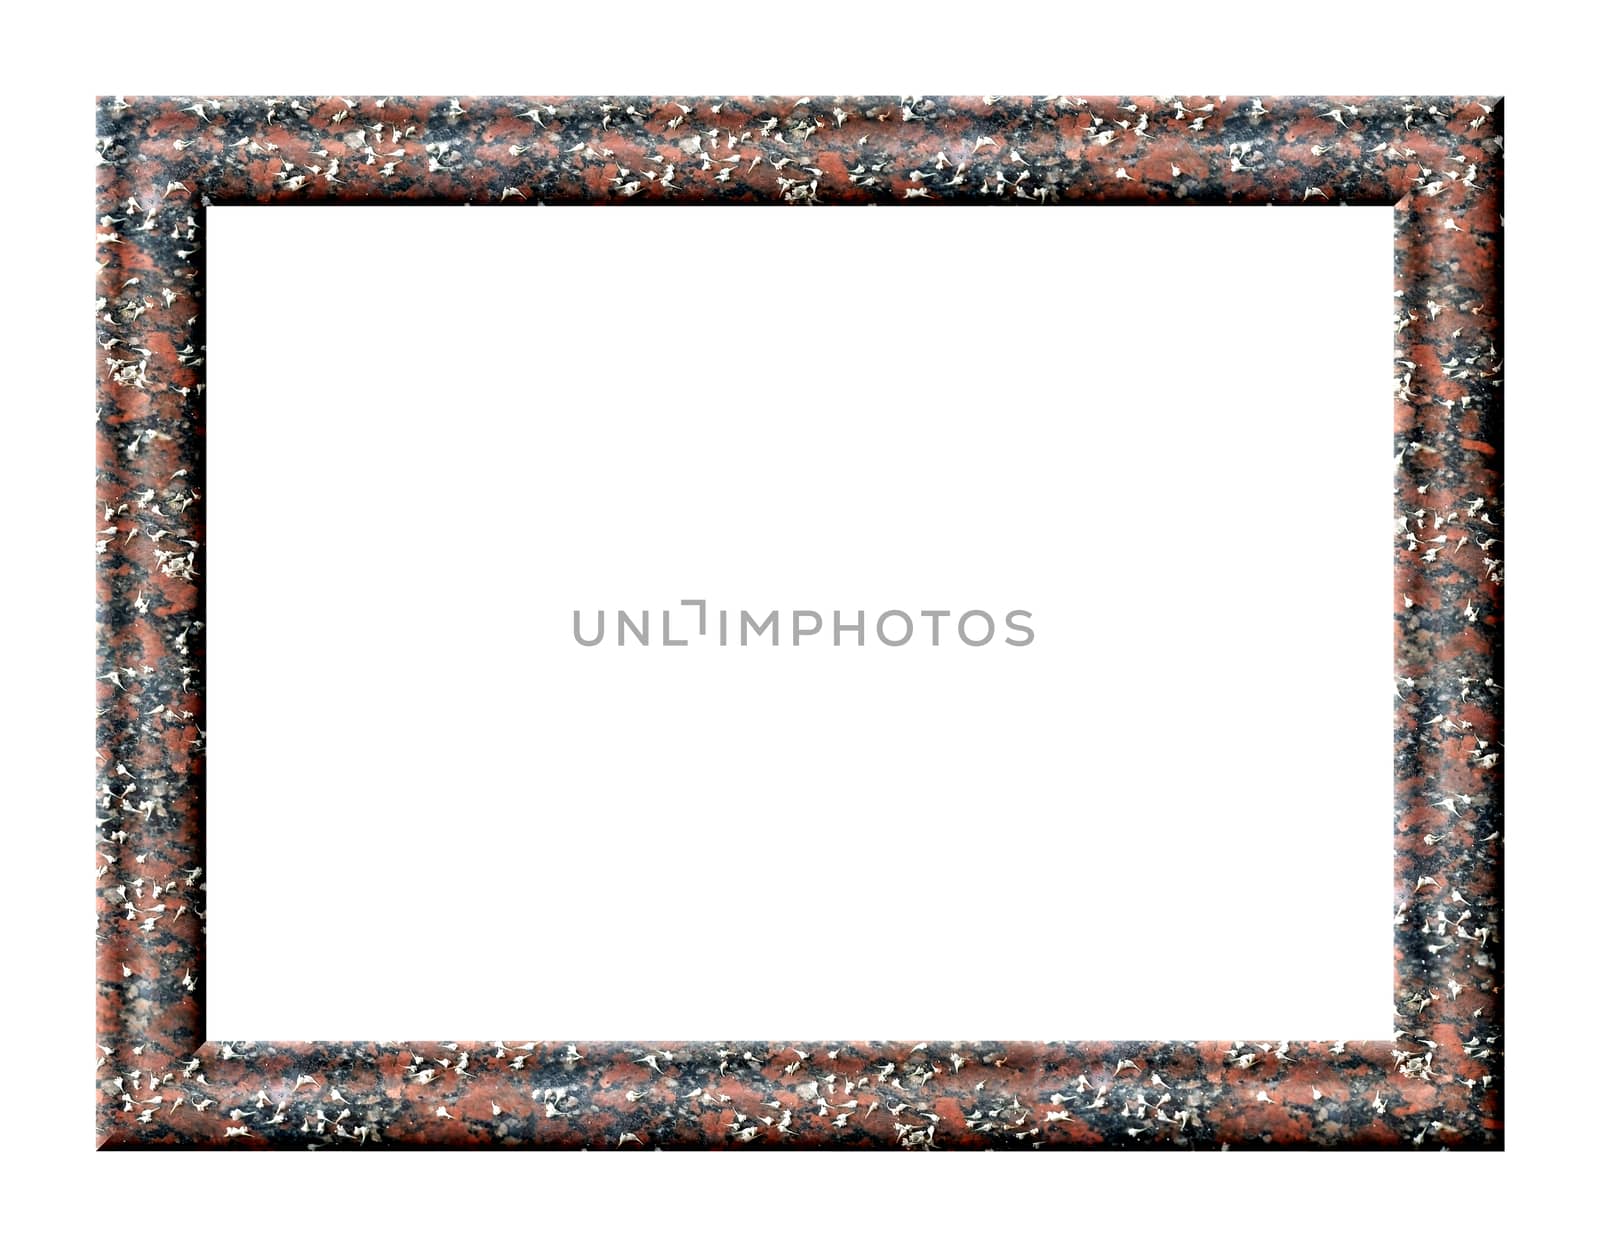 Rectangular frame with empty red granite texture with fallen white flowers on its surface on a white background